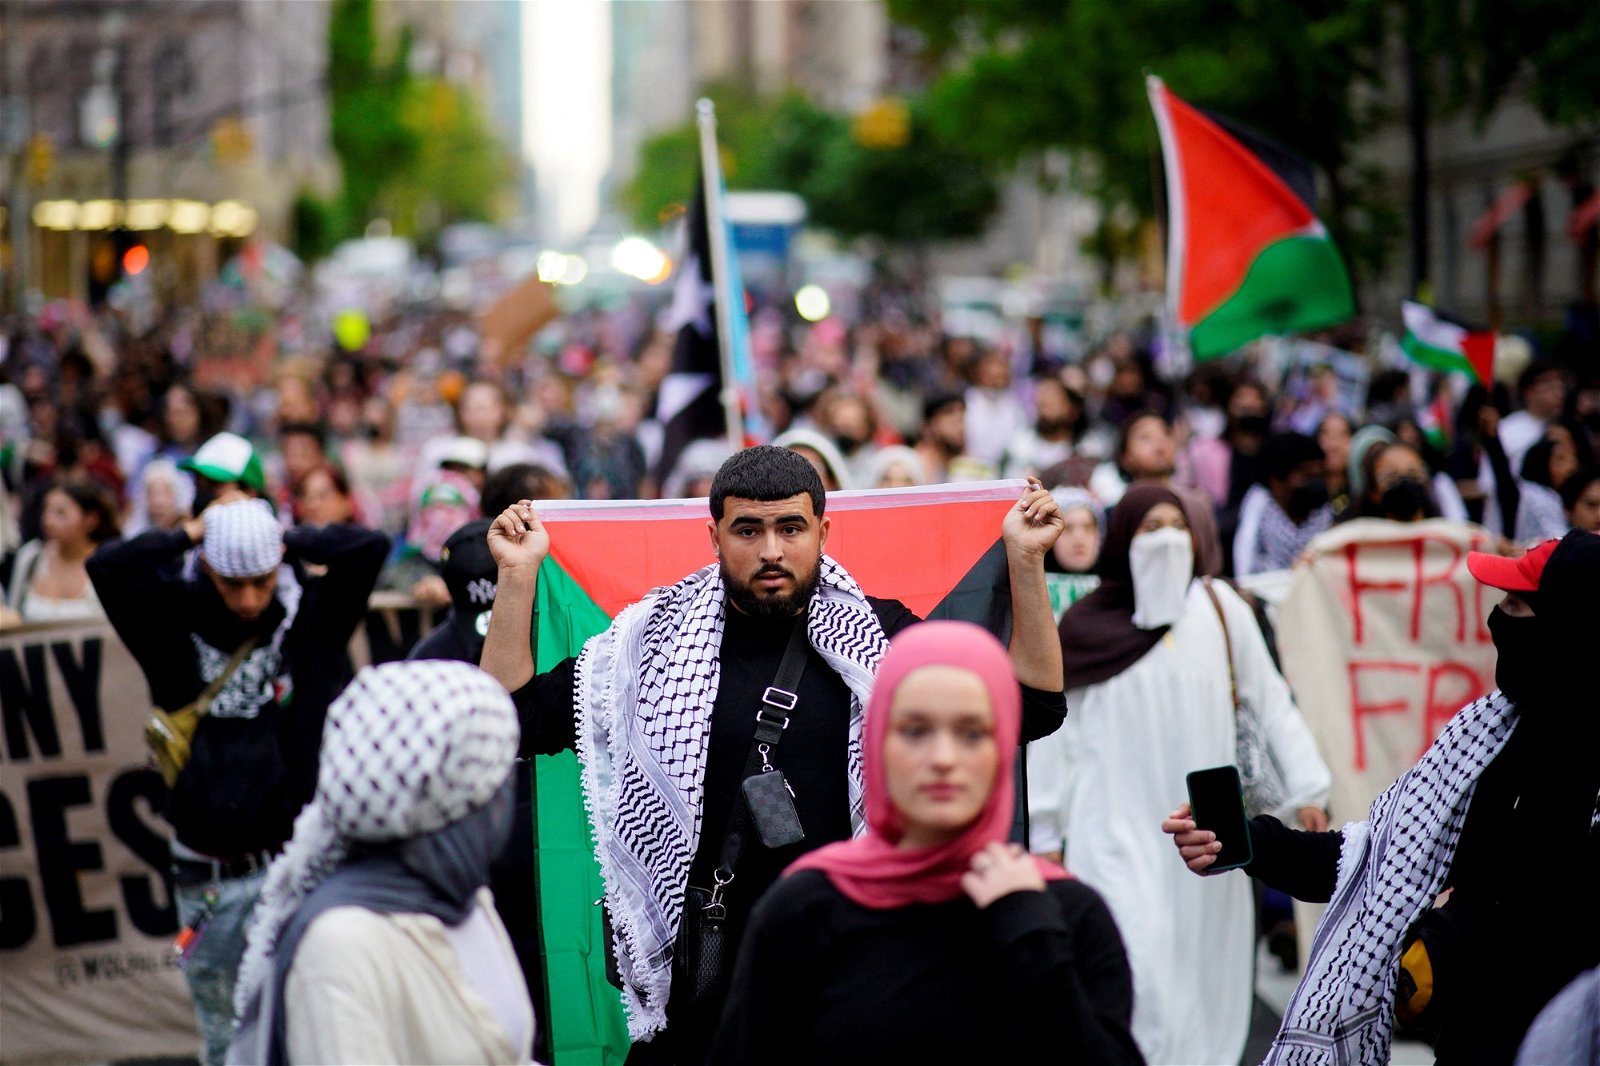 A crowd carrying palestine's flag. 